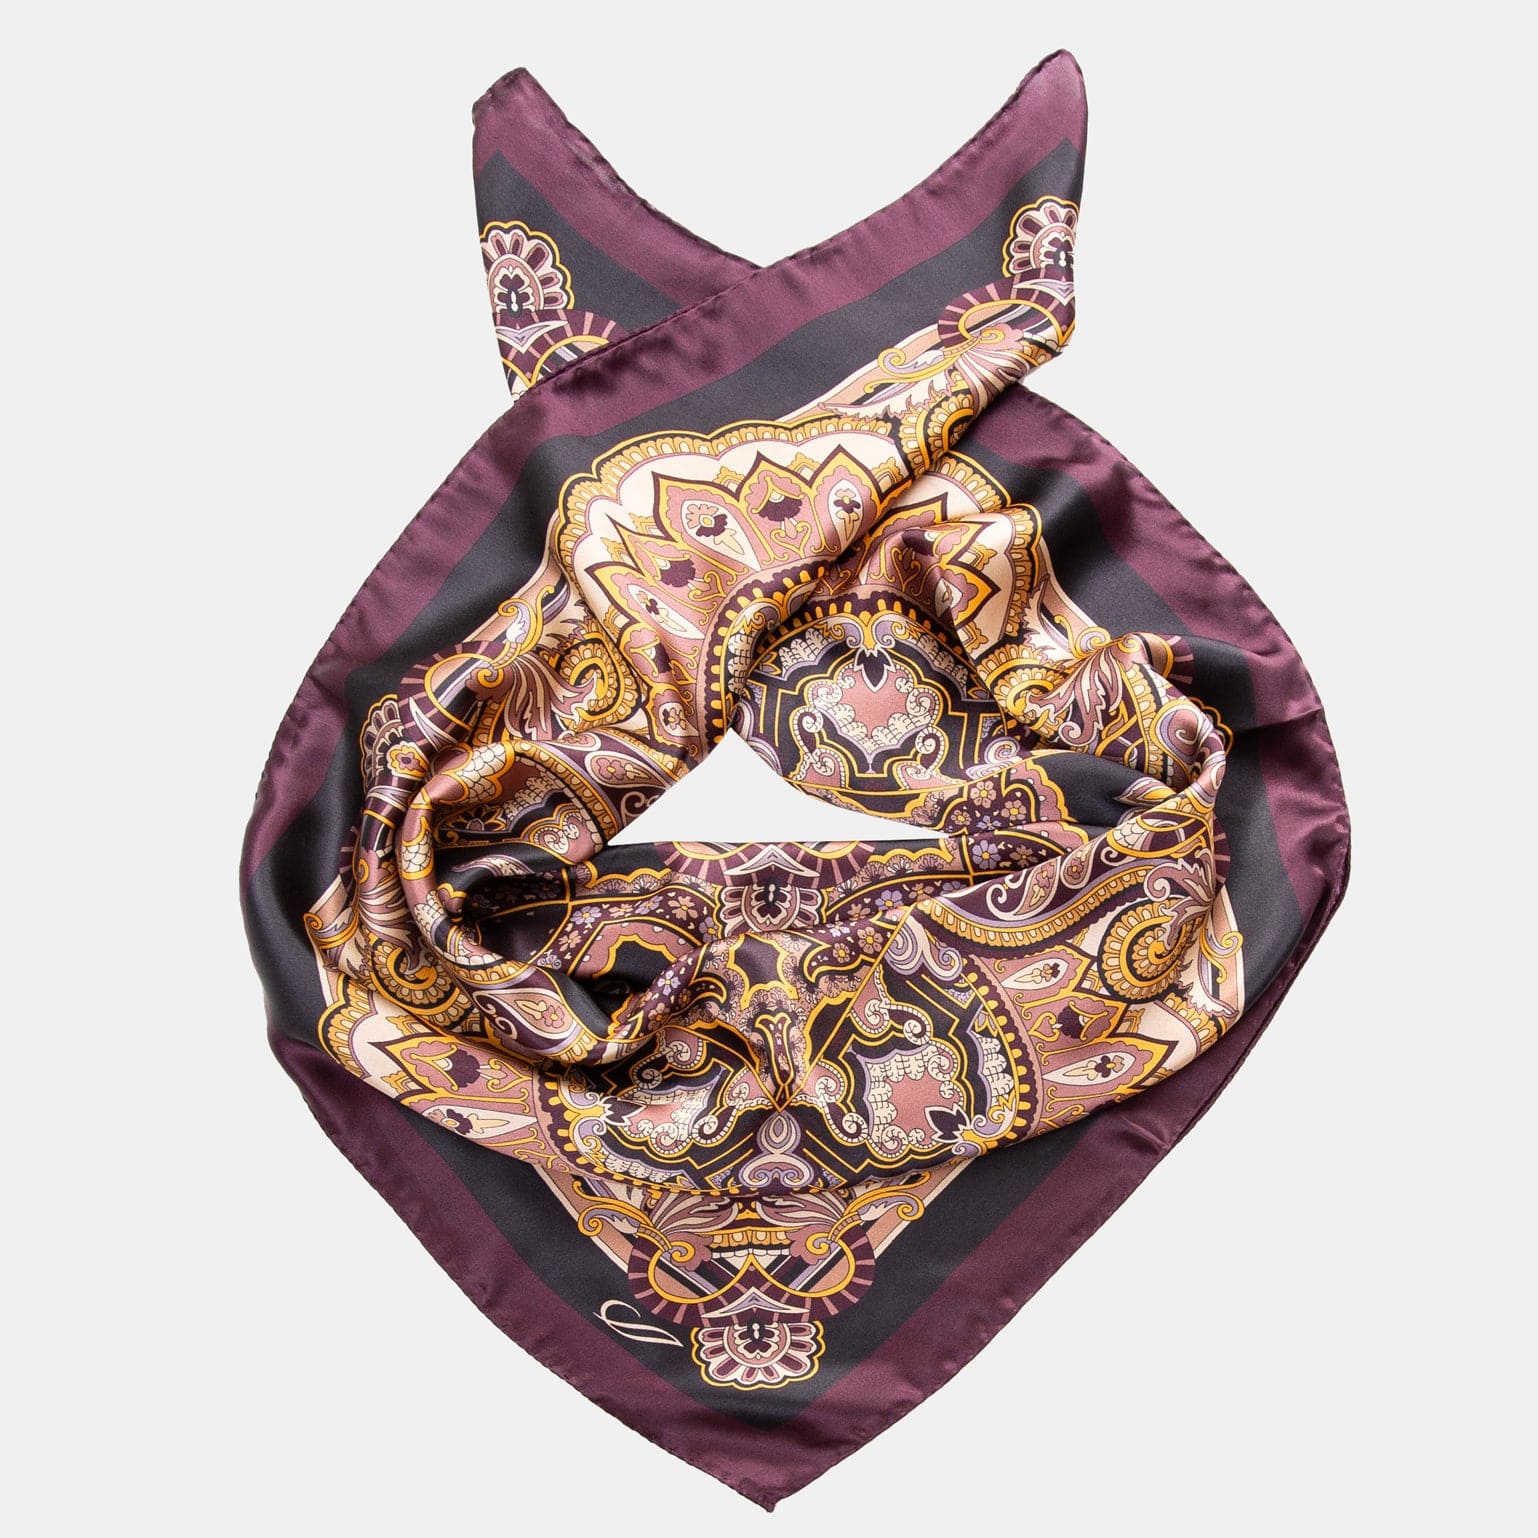 Small Square Silk Satin Scarf for Womens, Equestrian Design, Match Outfits  or Tie to Handbags or Wrist, 21x21 